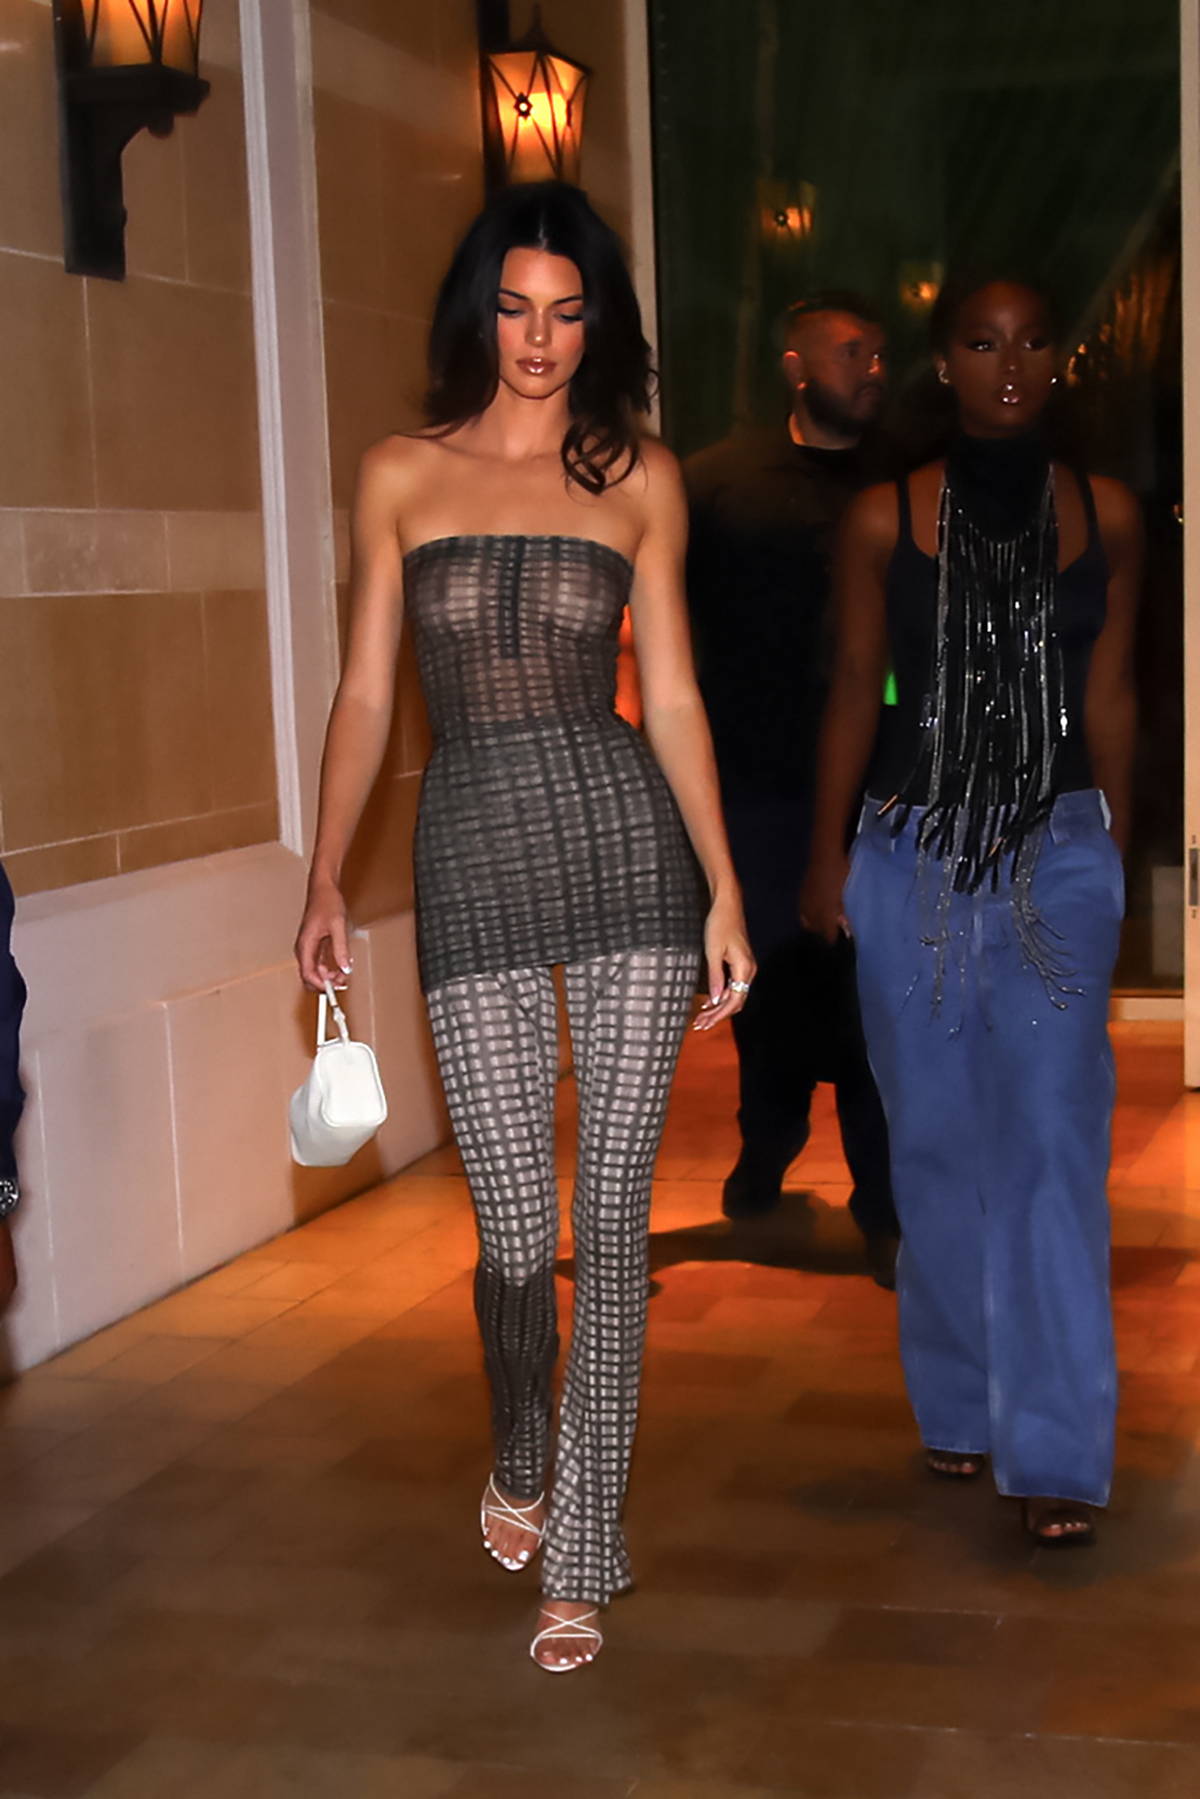 Kendall Jenner rocks a see-through outfit as she heads to grand opening of  Delilah in